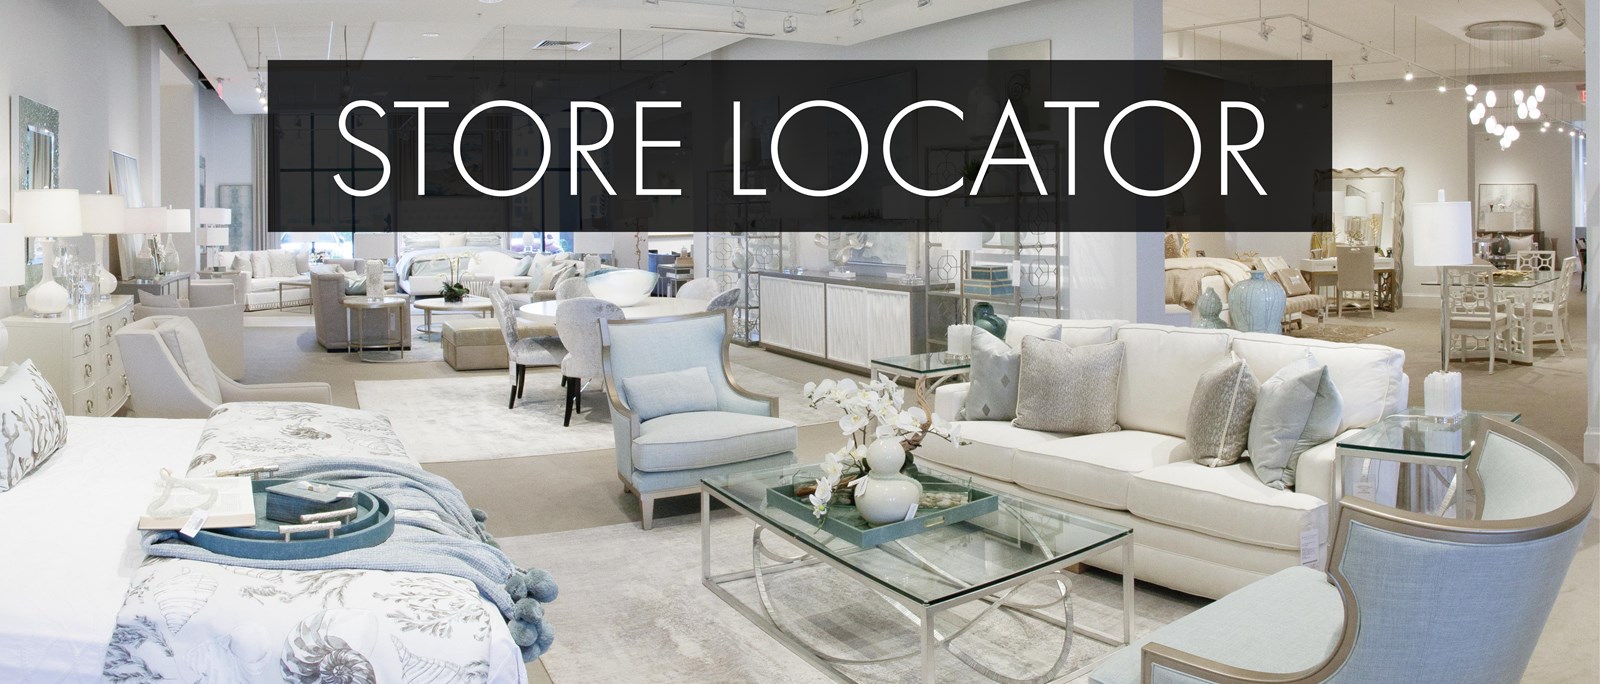 Image of the Naples Showroom. Text: Store Locator. Links to list of Robb & Stucky showrooms and contact information.